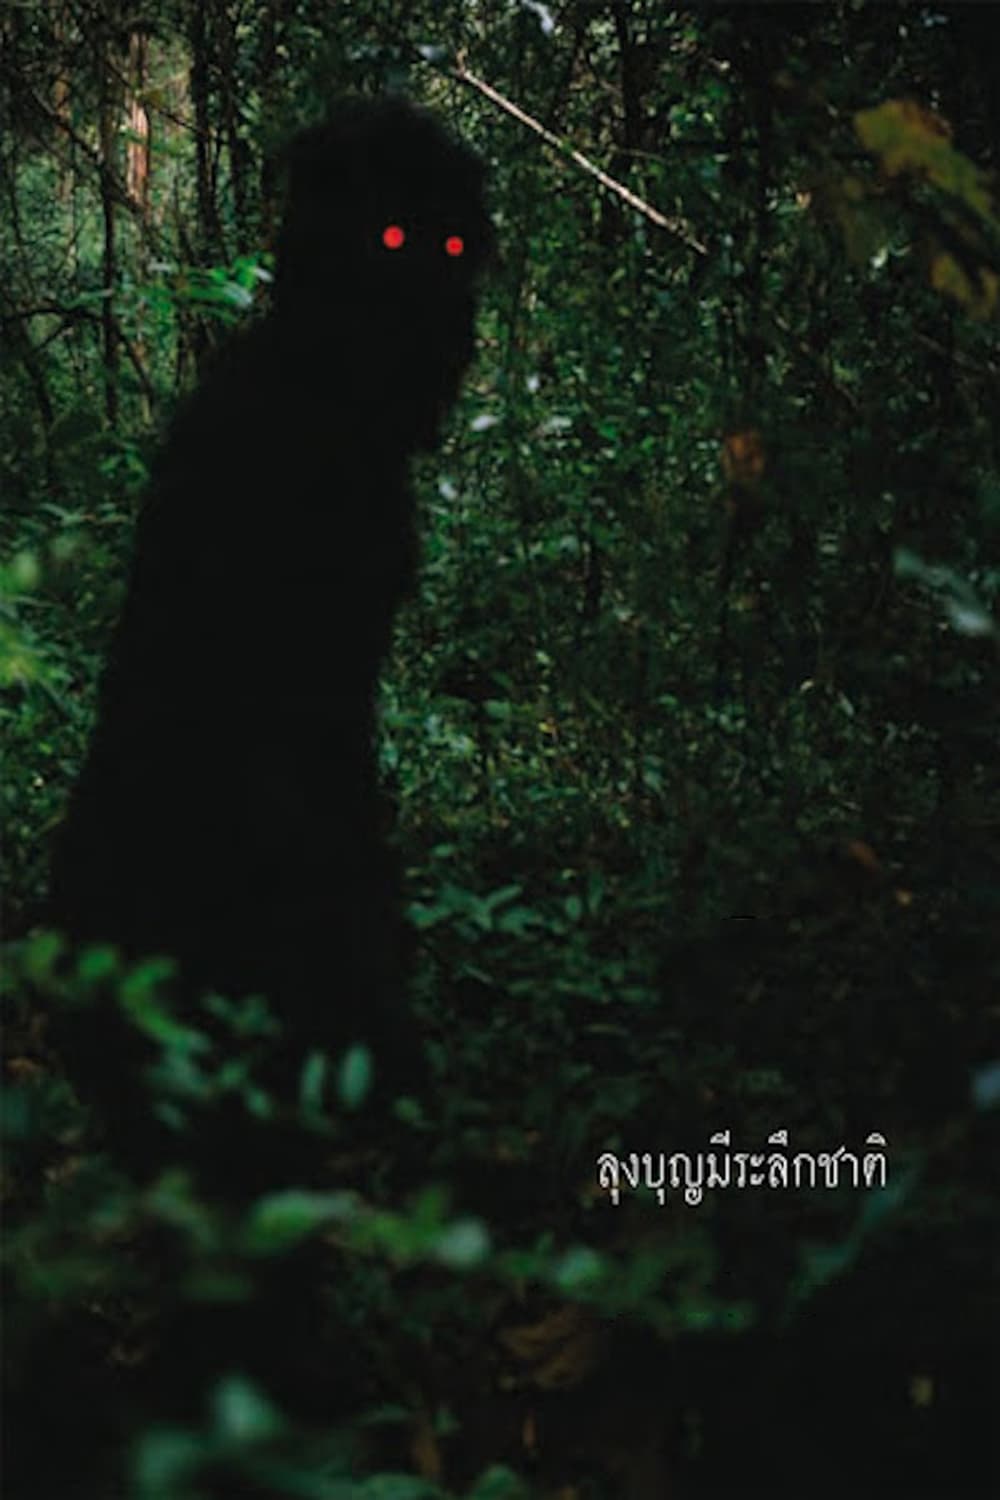 Uncle Boonmee Who Can Recall His Past Lives (Uncle Boonmee Who Can Recall His Past Lives) [2010]